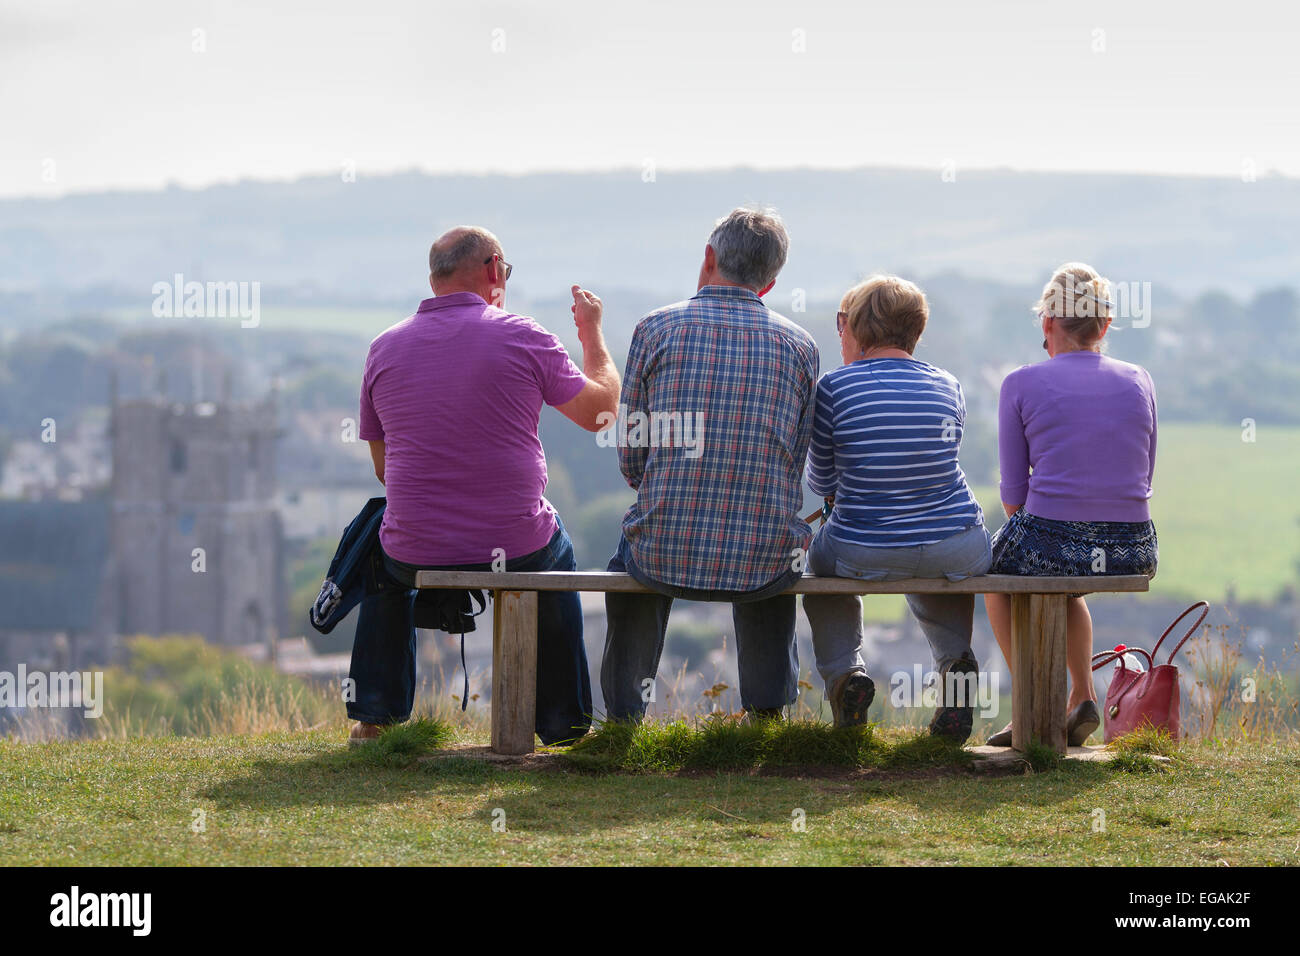 Four active seniors sitting on a wooden bench, seen from behind, overlook the town of Corfe in Dorset. Stock Photo